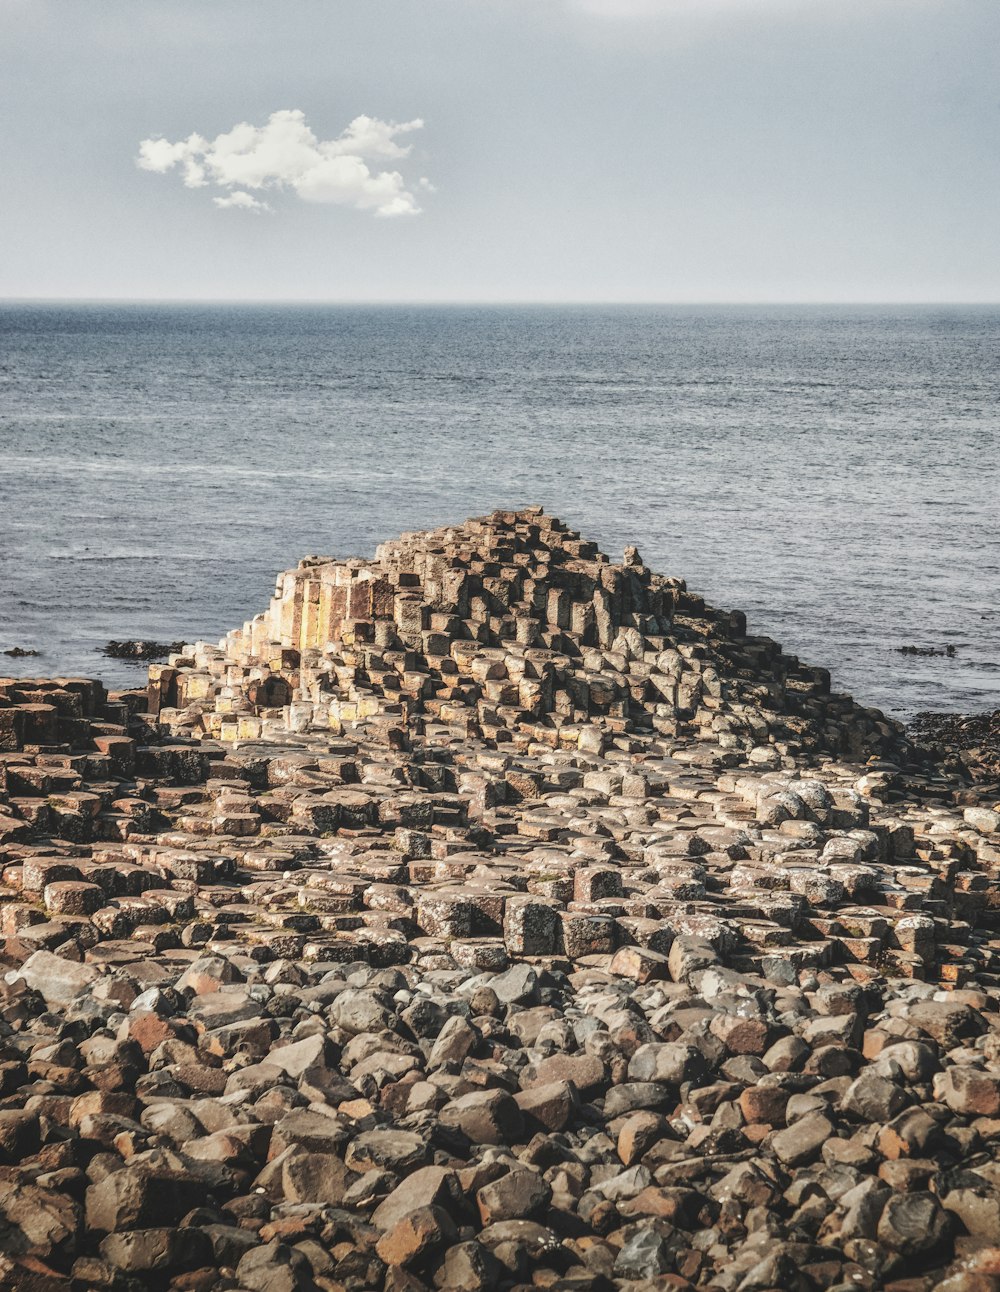 a large pile of rocks sitting on top of a beach